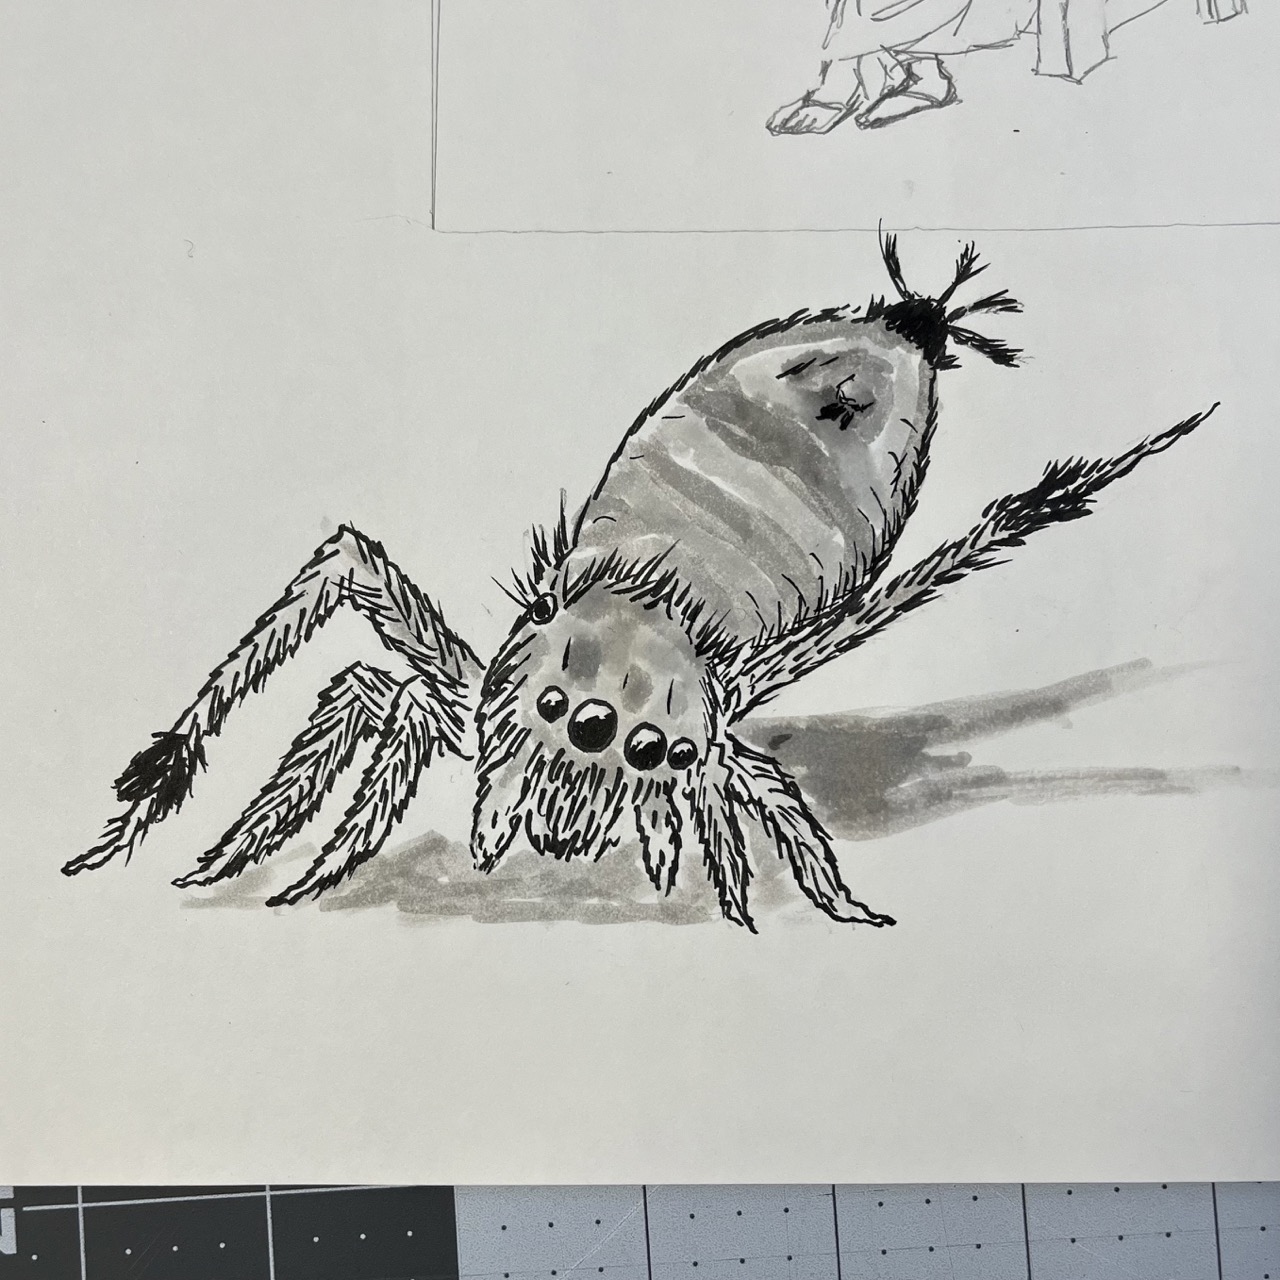 A pen and ink drawing of a peacock spider nicknamed the sparklemuffin.